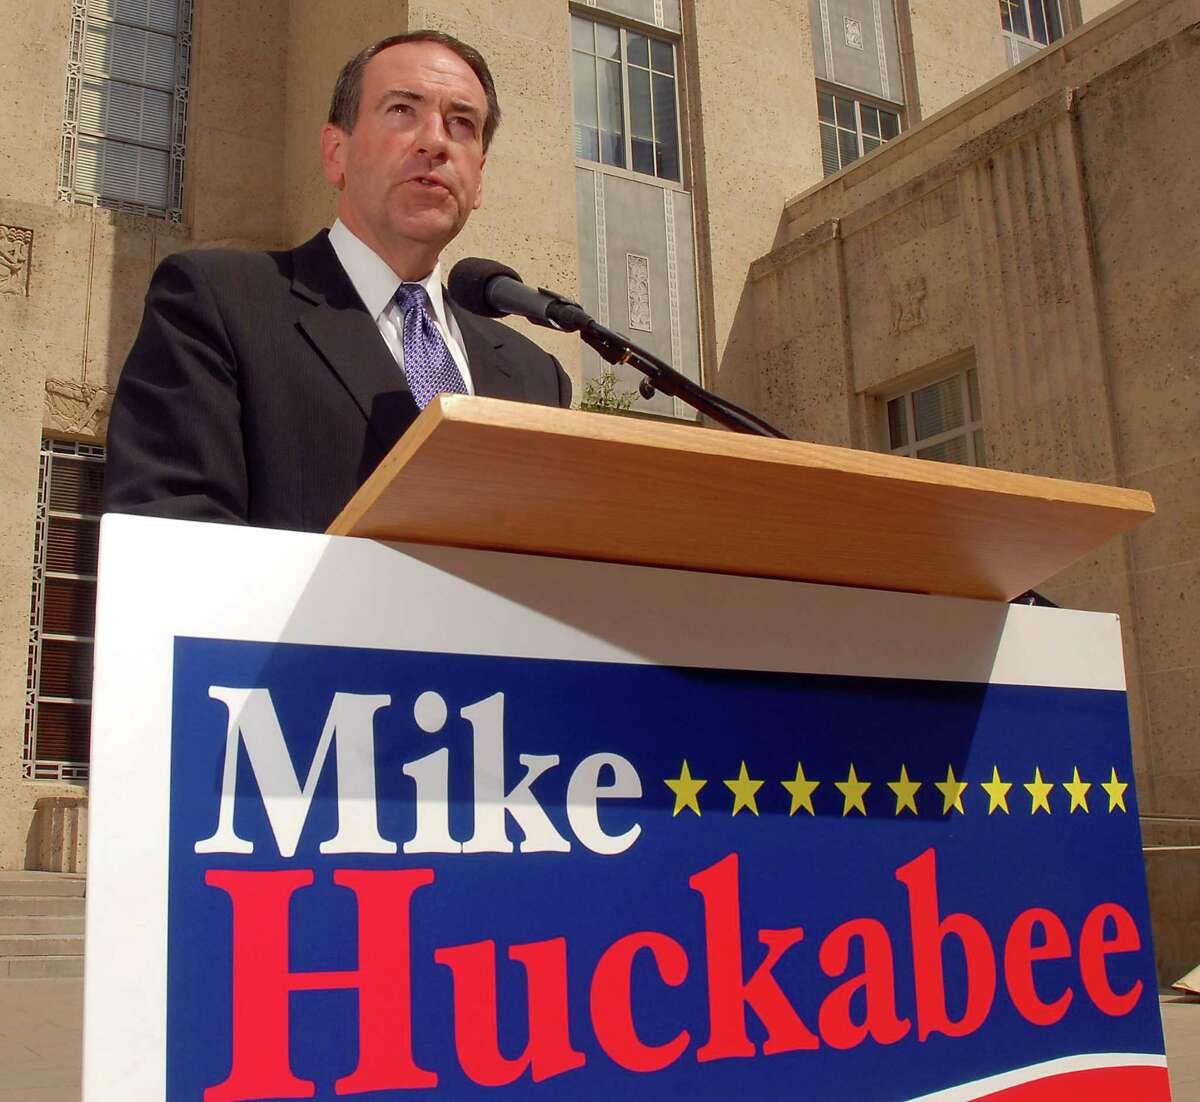 Presidential candidate Mike Huckabee, shown here in 2007, was an early proponent of the Fair Tax.